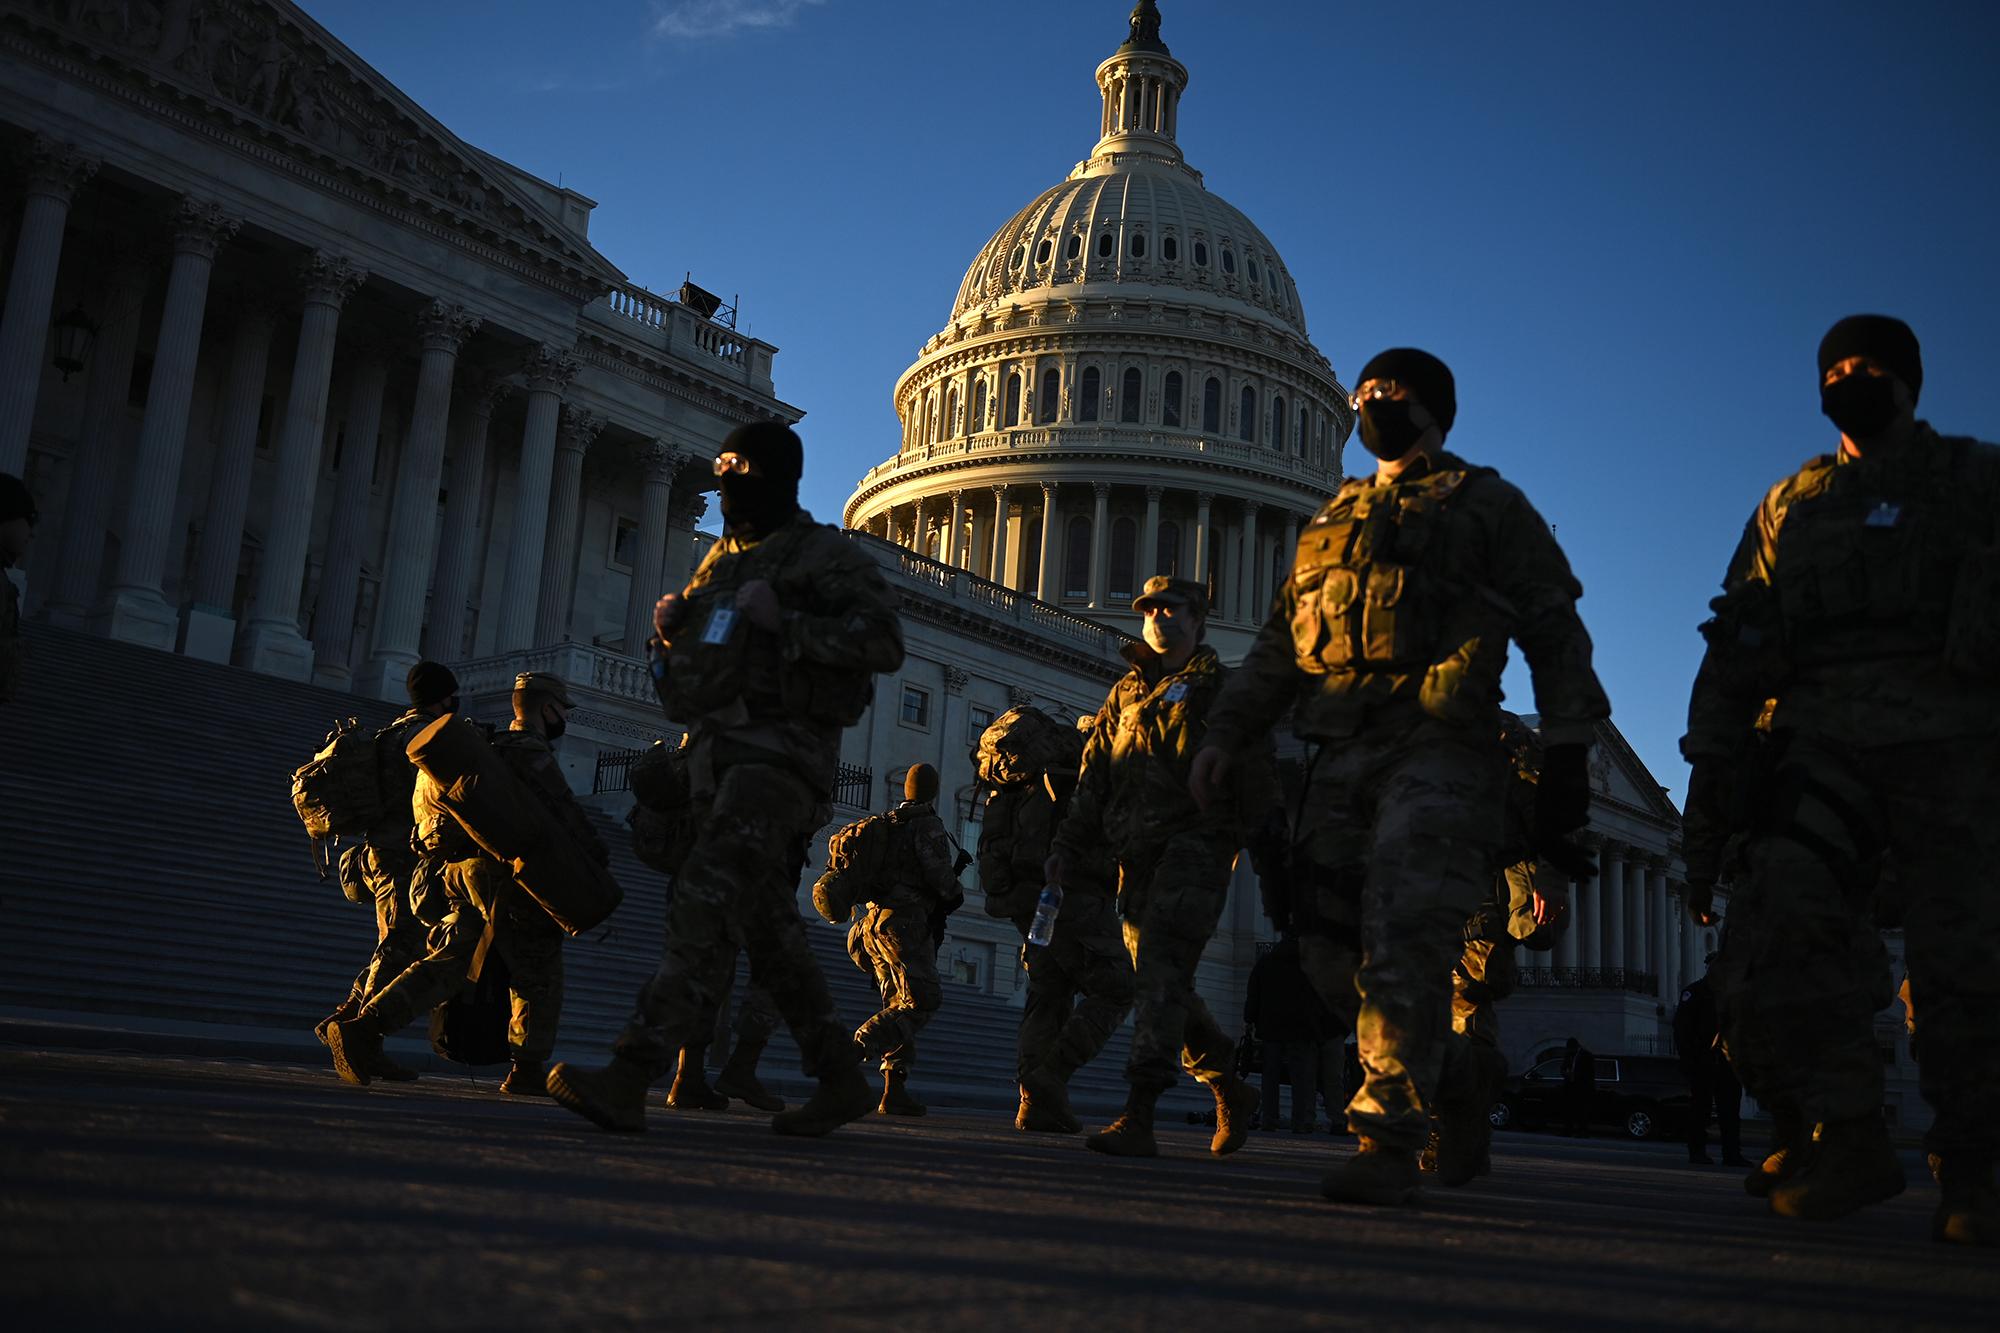 Members of the National Guard outside of the U.S. Capitol on Jan. 19, 2021, the day before the 59th innaugural ceremony of President Joe Biden and Vice President Kamala Harris. Photo: Brendan Smialowski/AFP